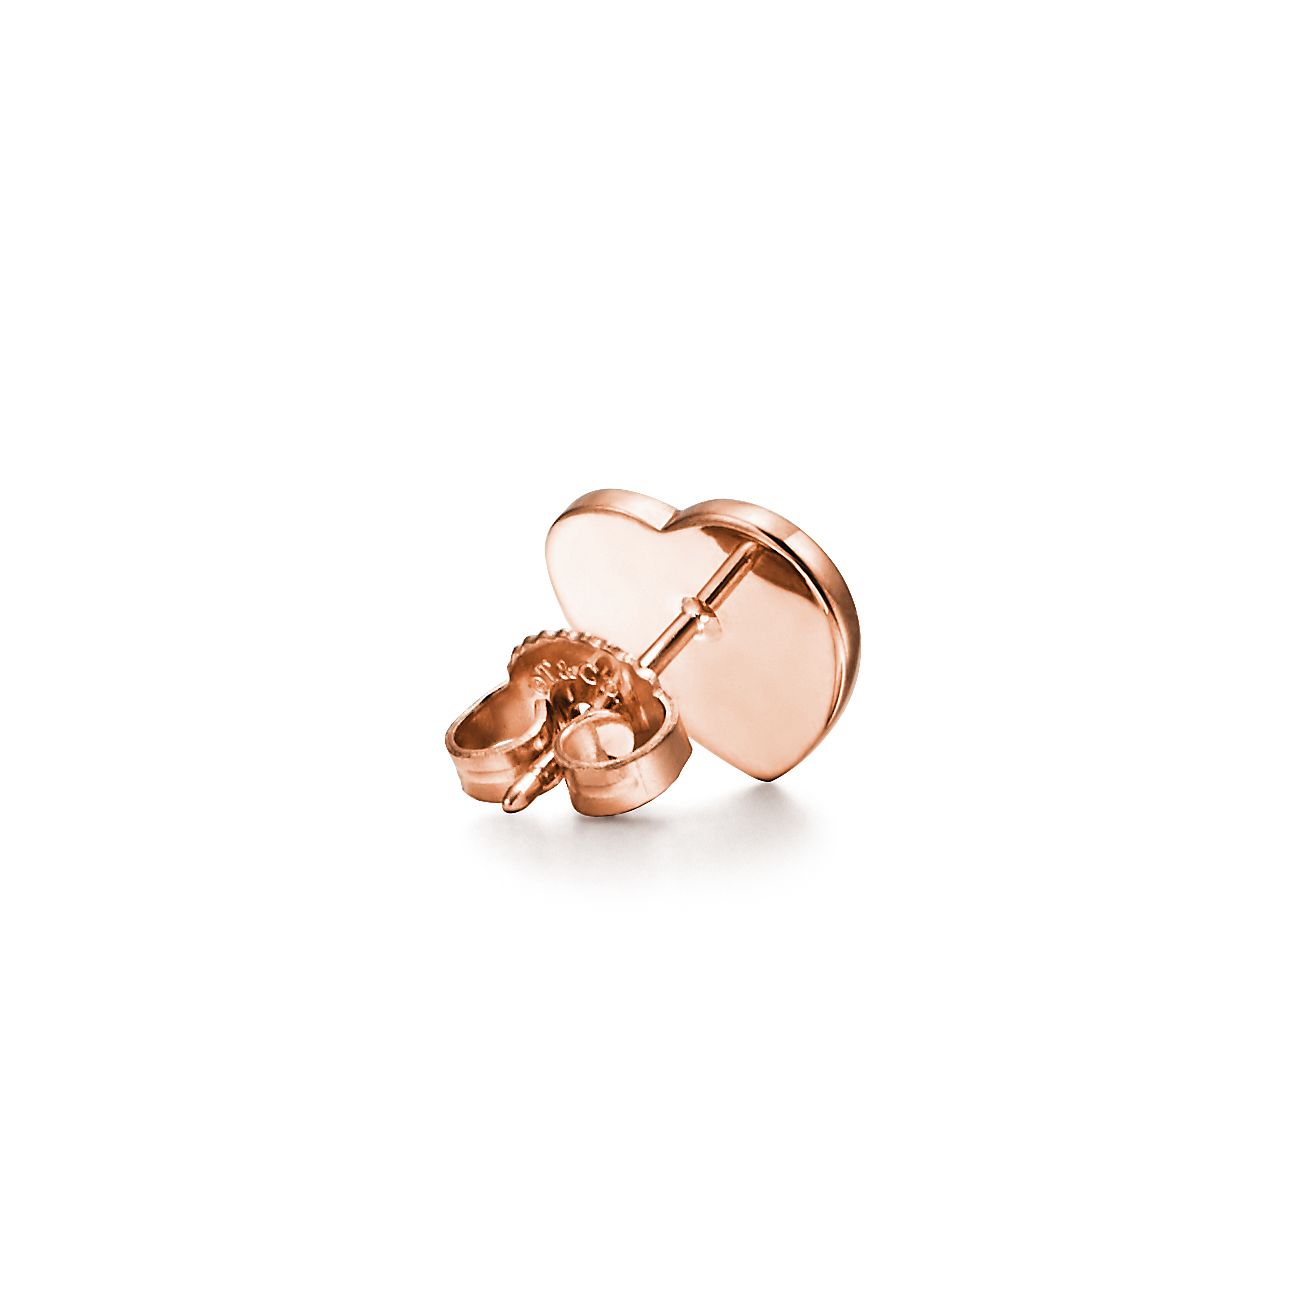 tiffany and co earrings rose gold